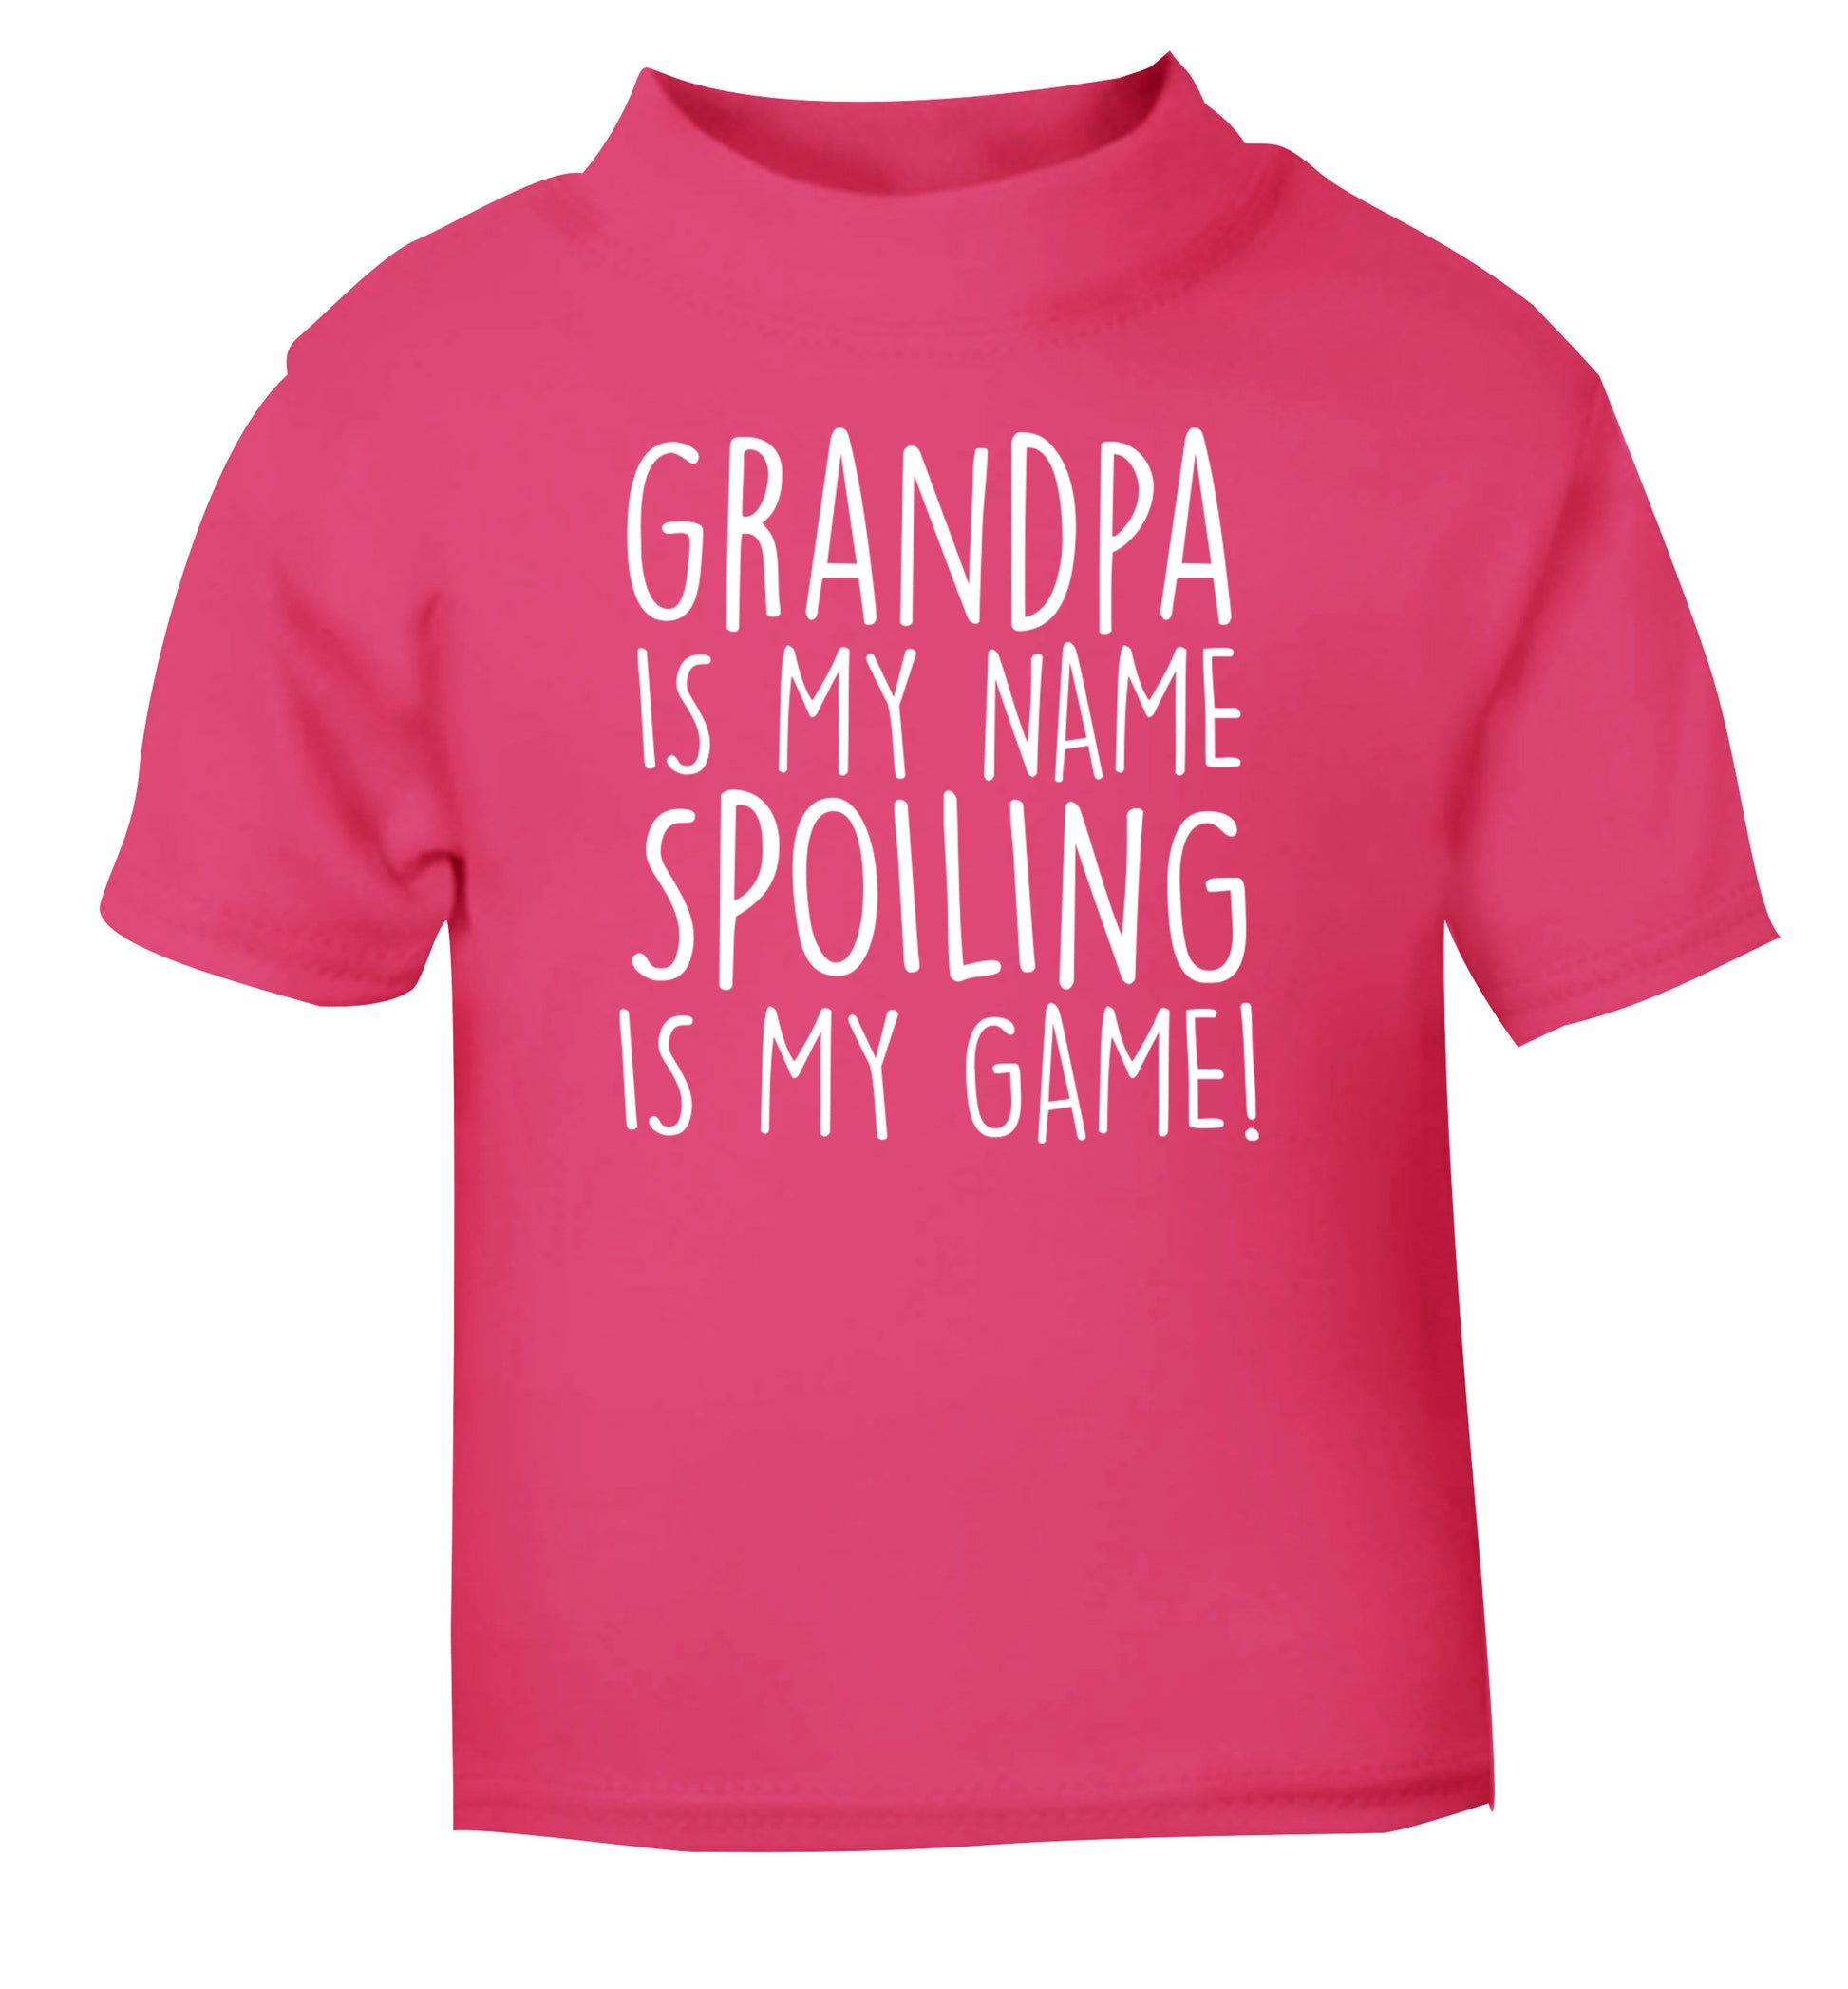 Grandpa is my name, spoiling is my game pink Baby Toddler Tshirt 2 Years